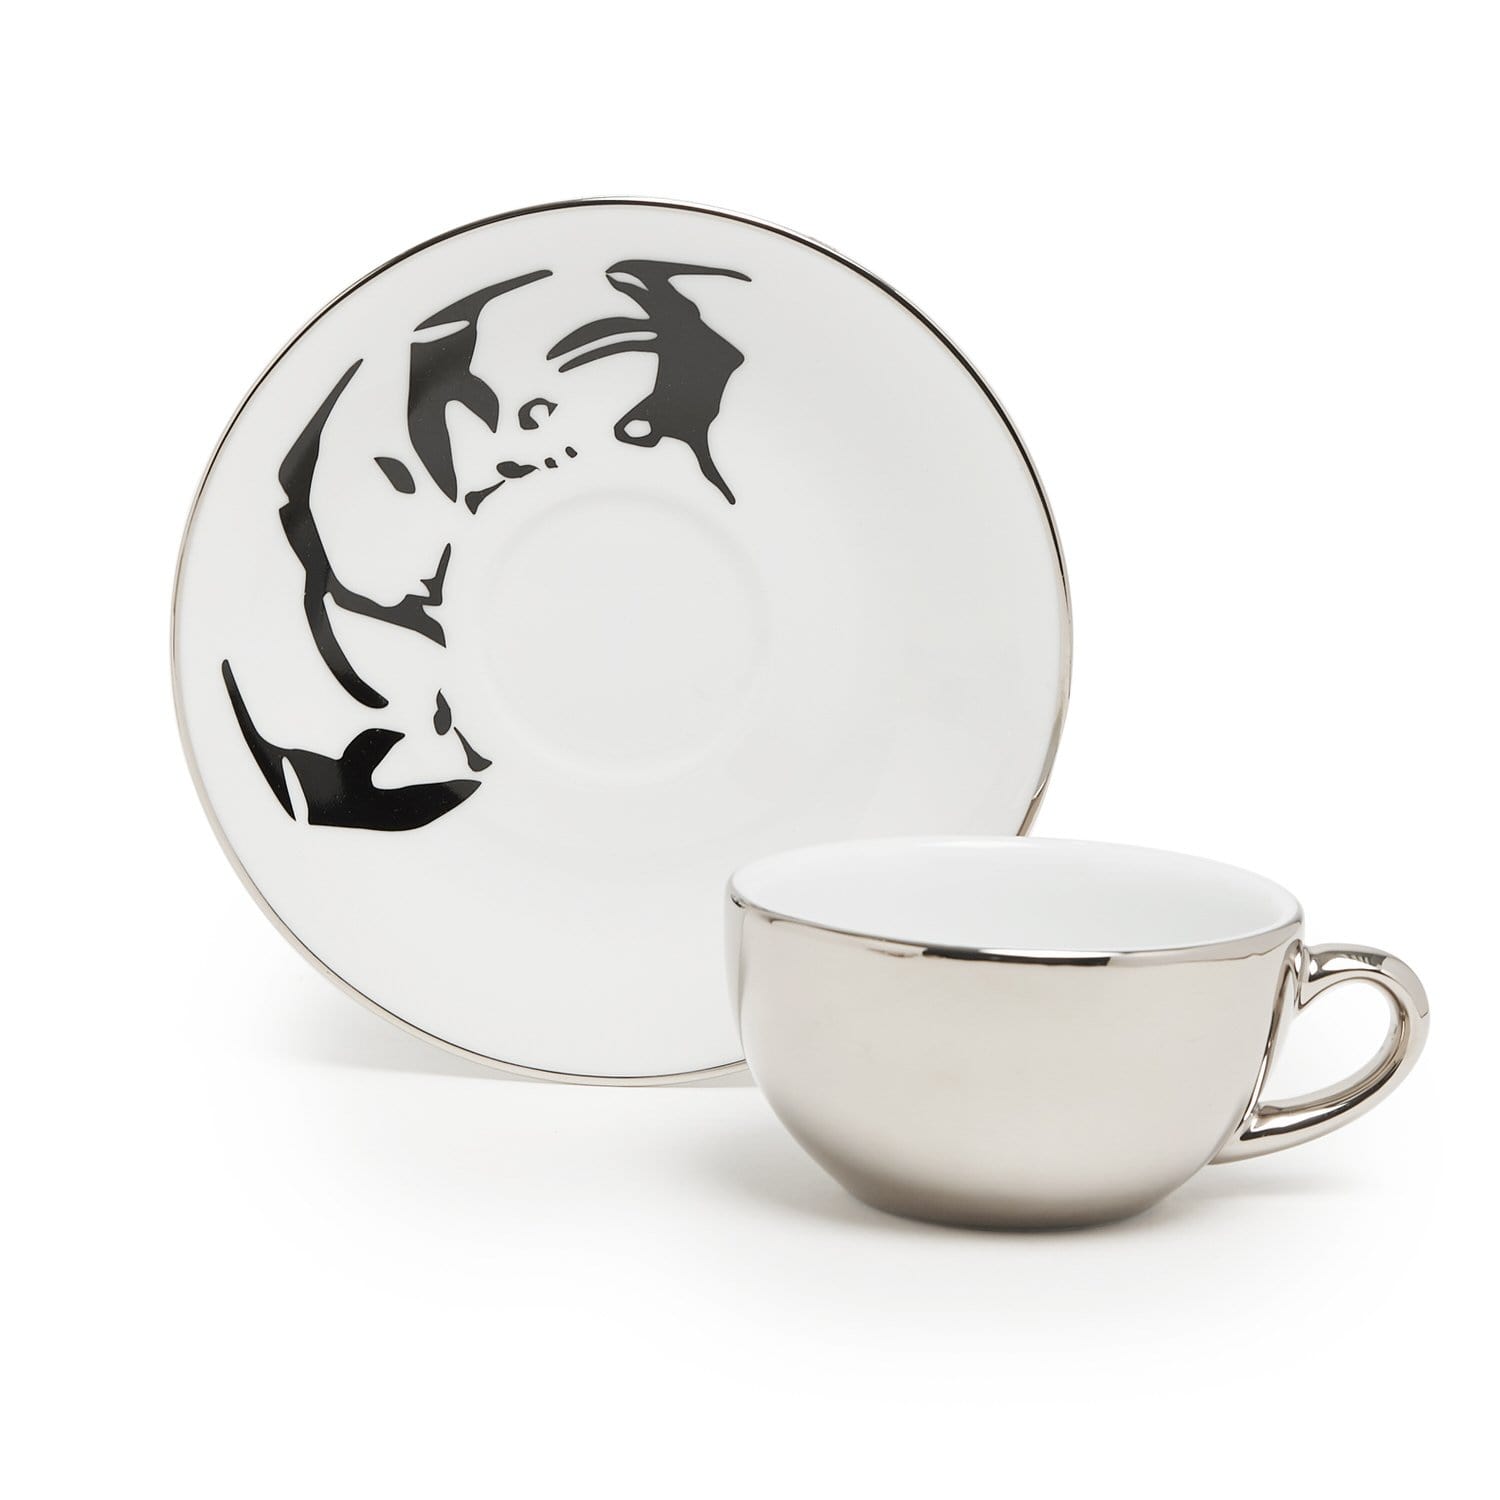 PENGUIN 6+6 COFFEE COFFEE CUP & SAUCER IN GIFT BOX